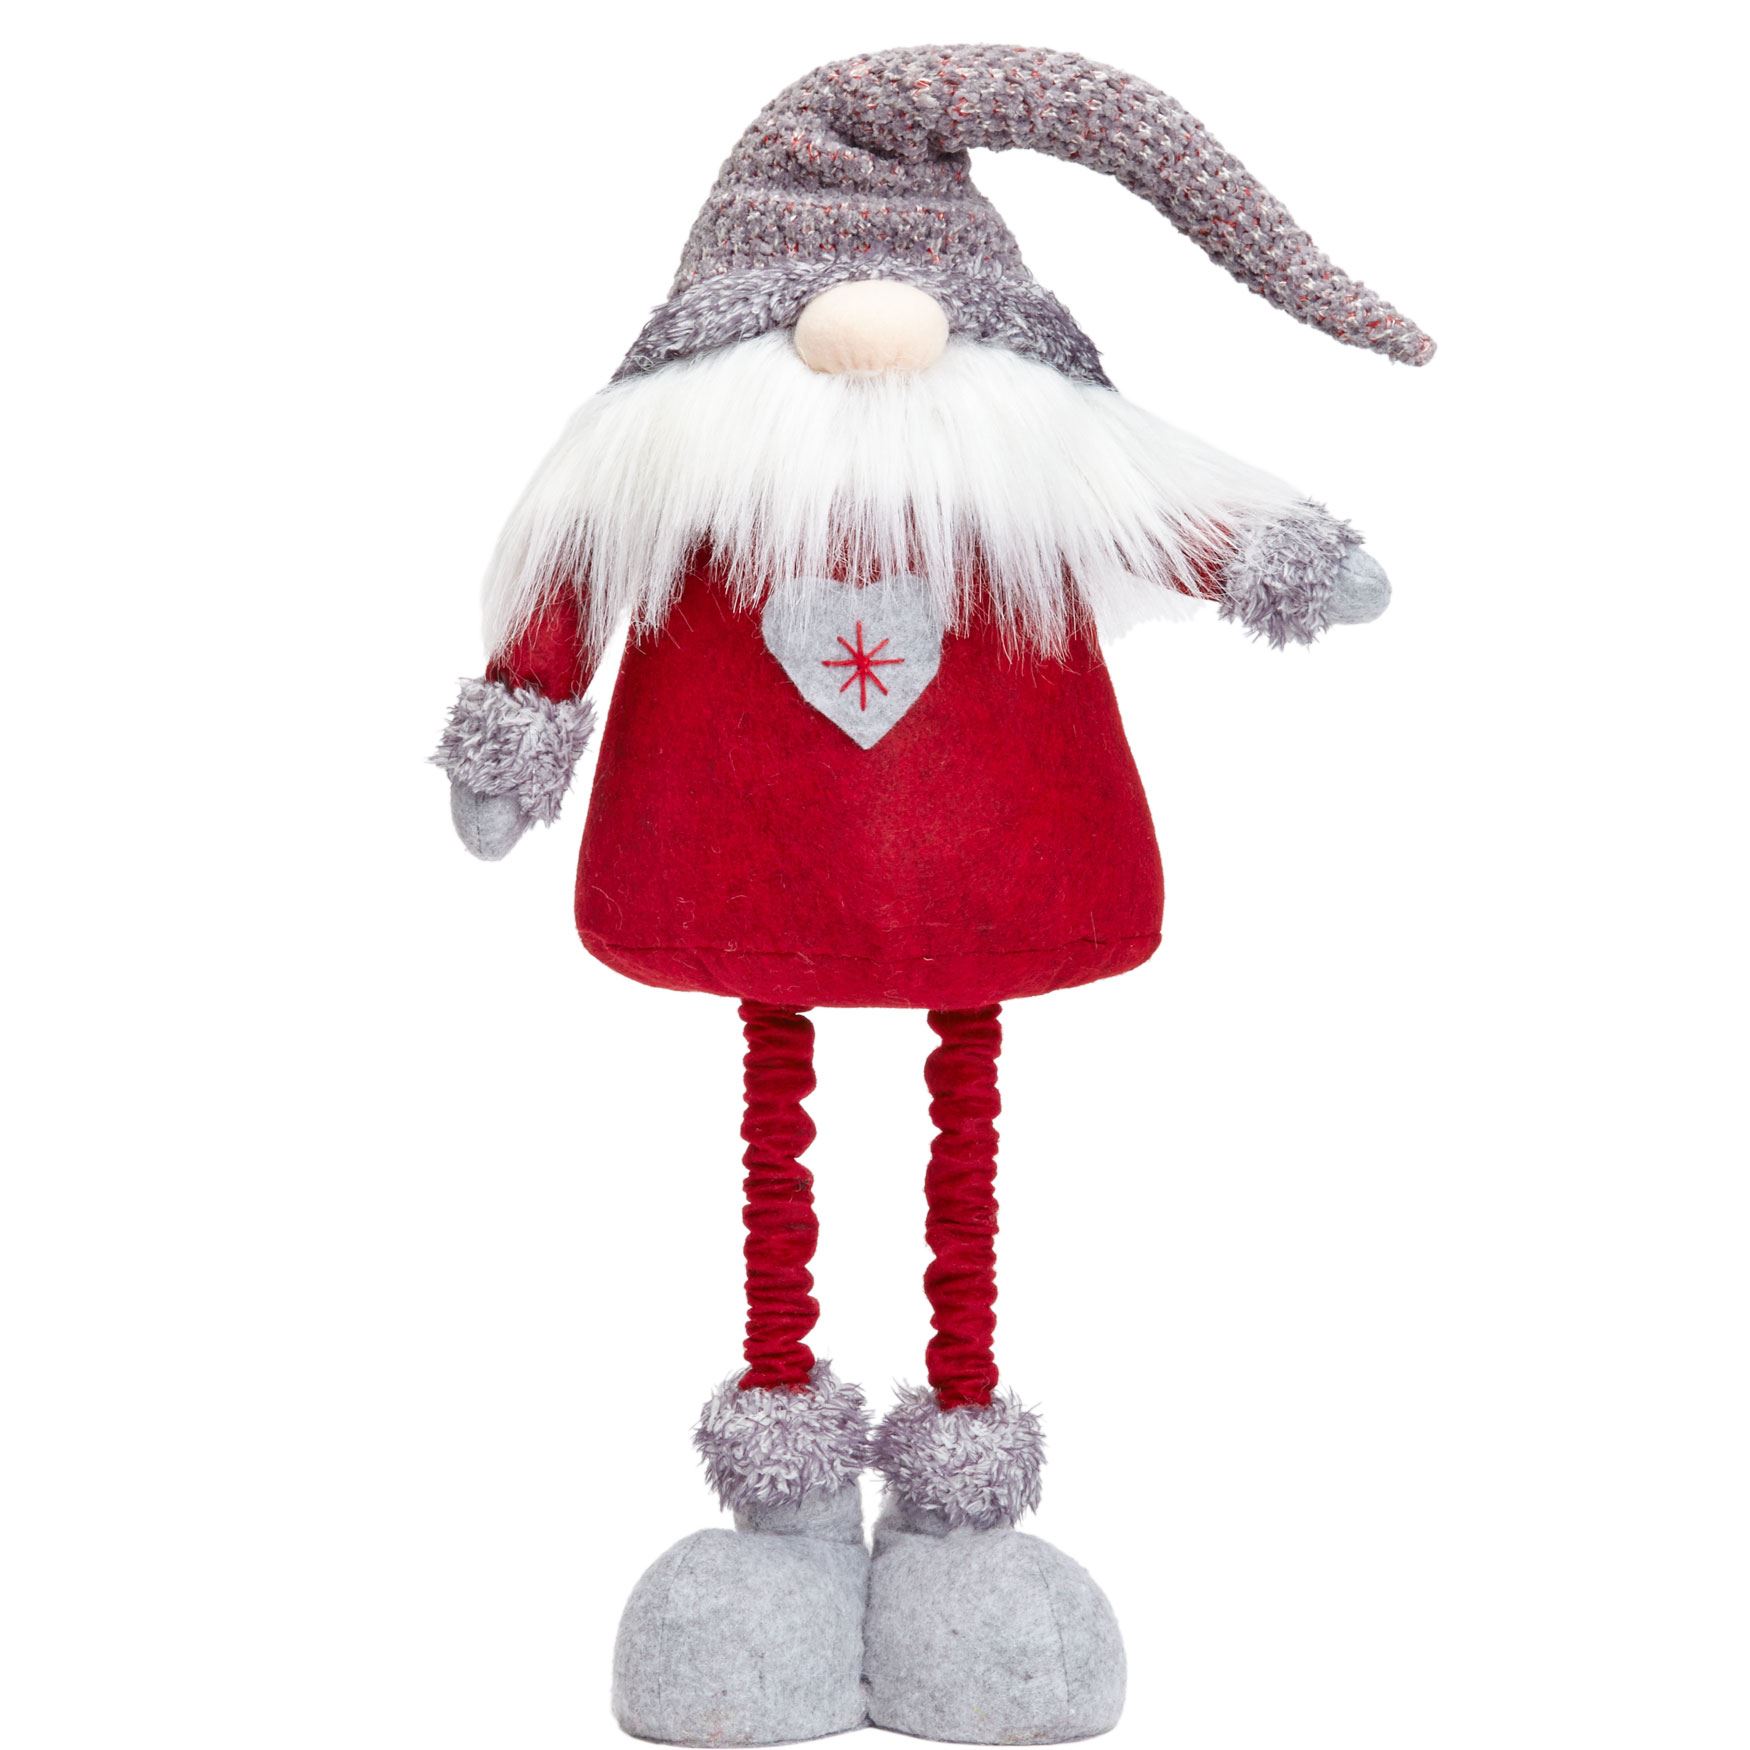 Extendable Nordic Gnome | Brylane Home